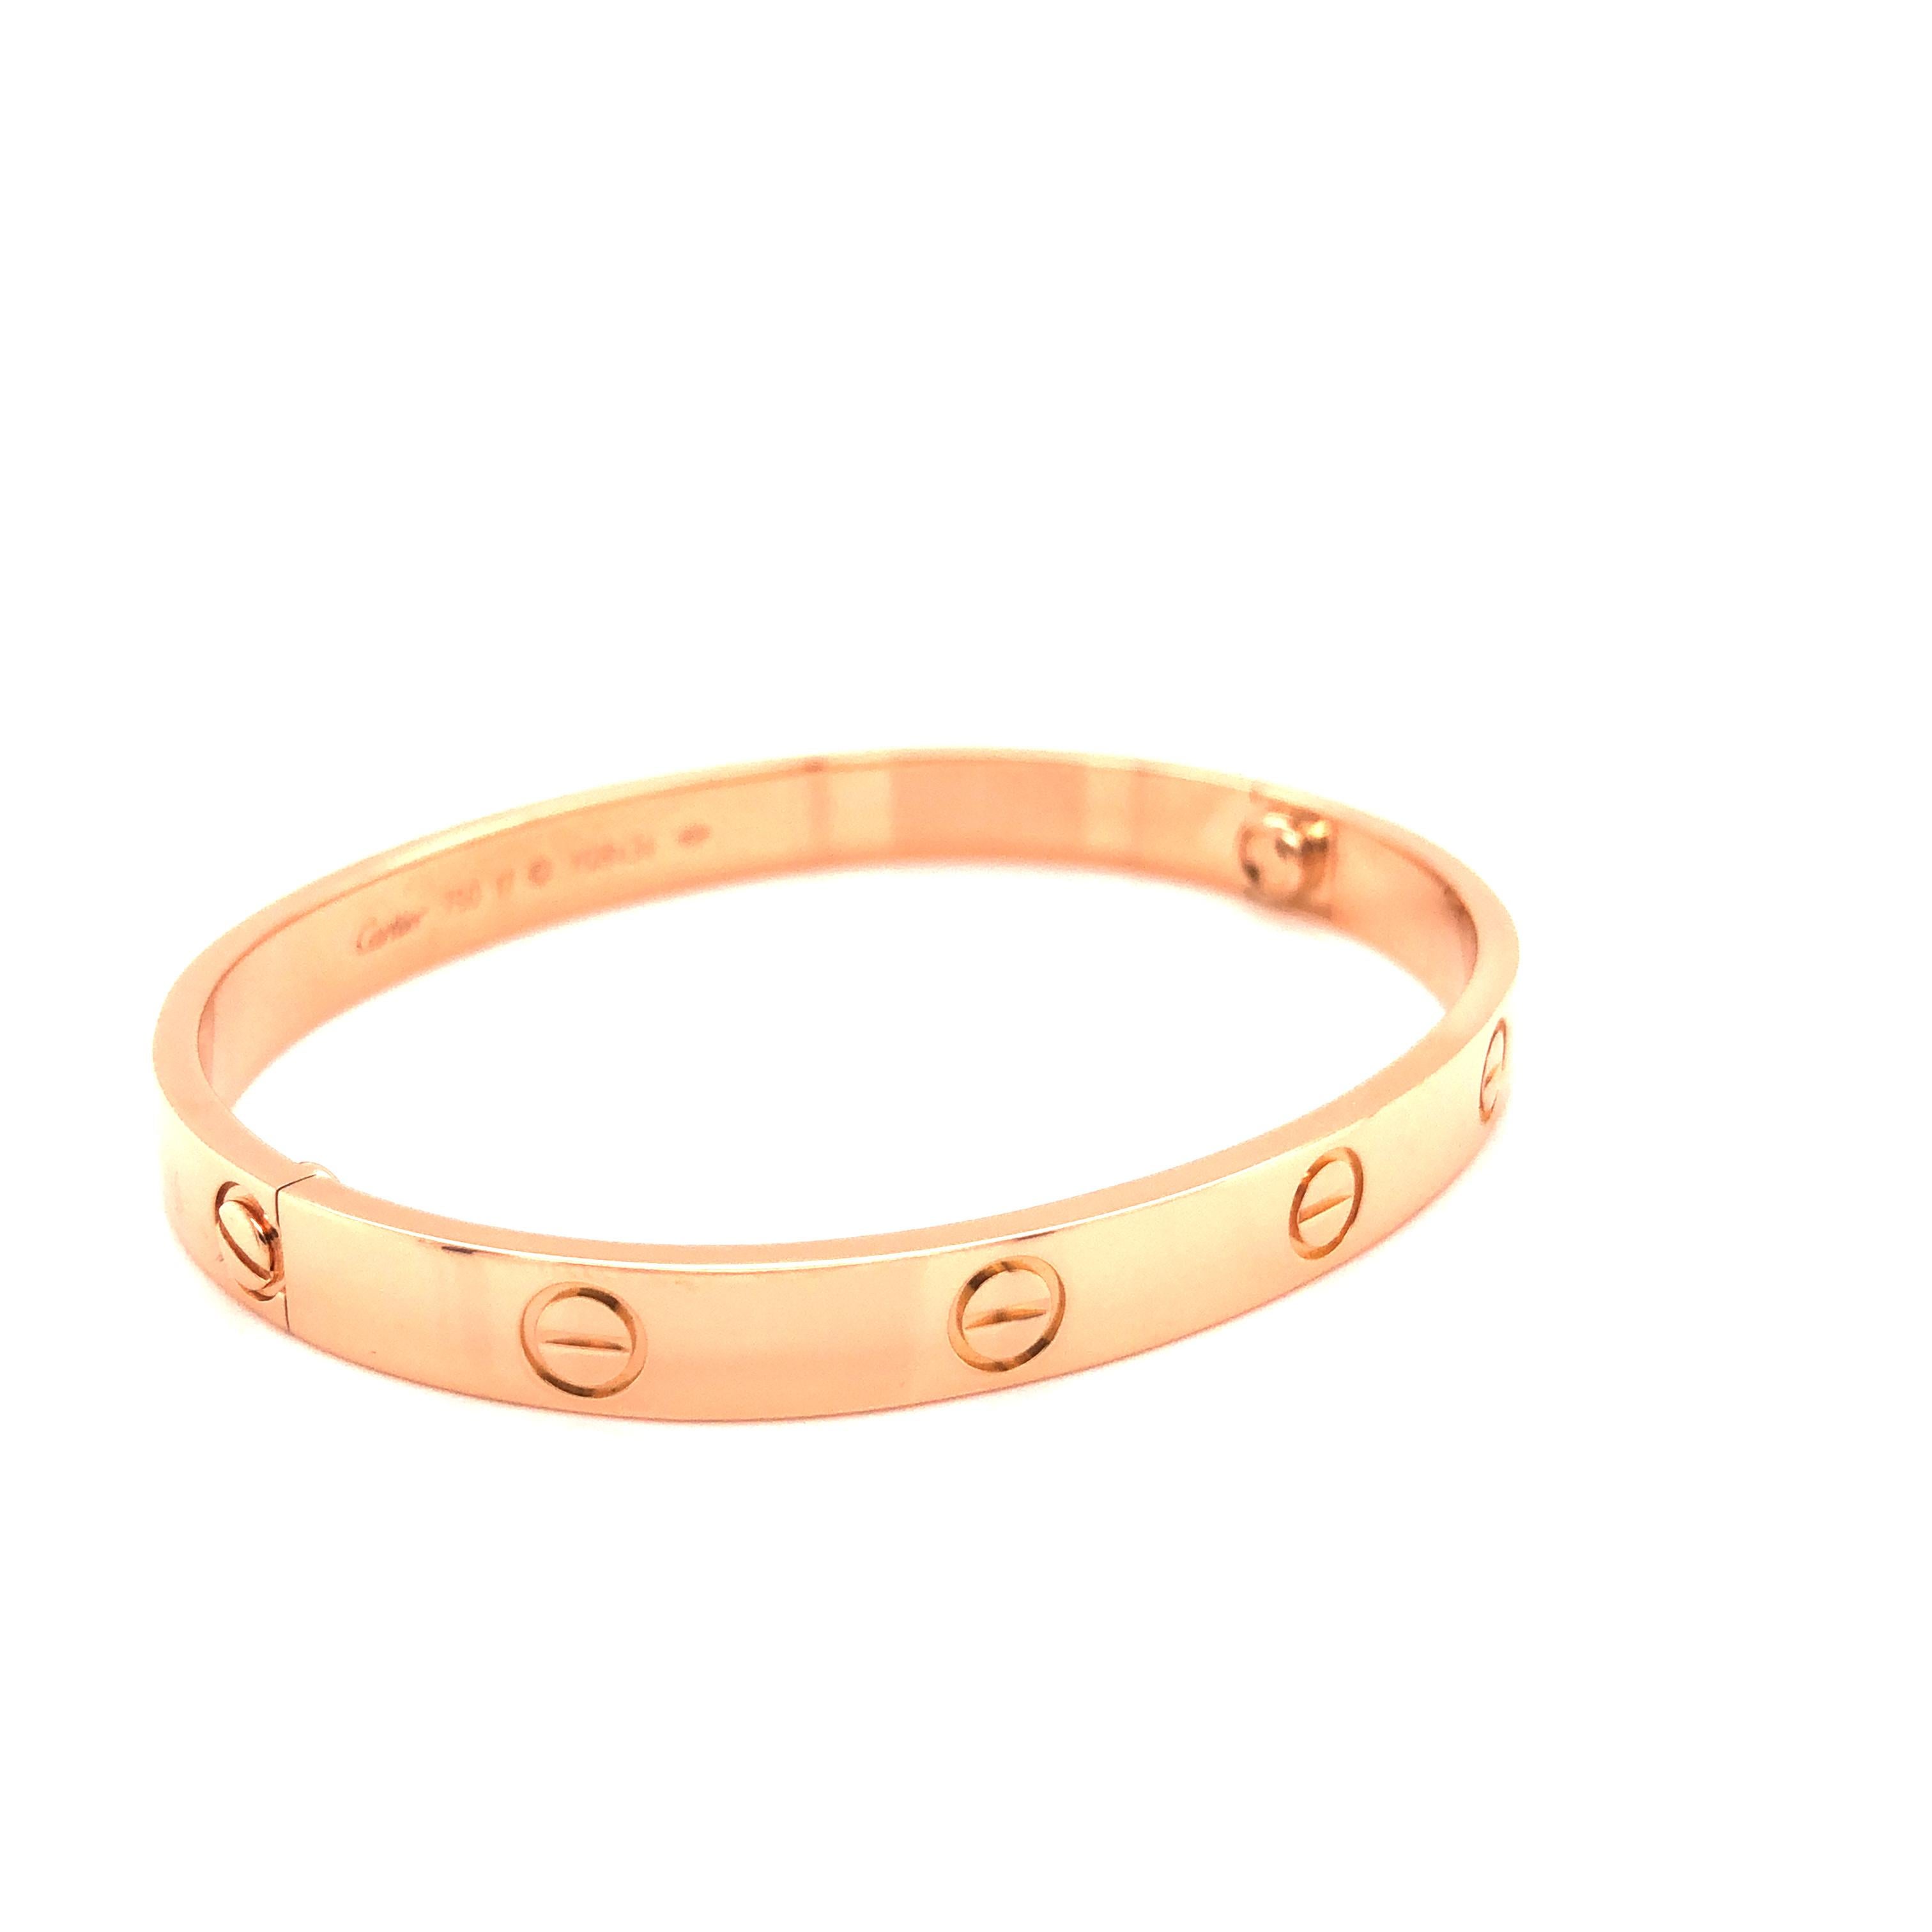 A signature 18k Rose Gold Cartier bracelet from the Love collection. The bracelet is a size 17. Original box and key included as well as Cartier paperwork. Pristine condition, shows no scratches or wear. New screw system. All Photos taken under 20x